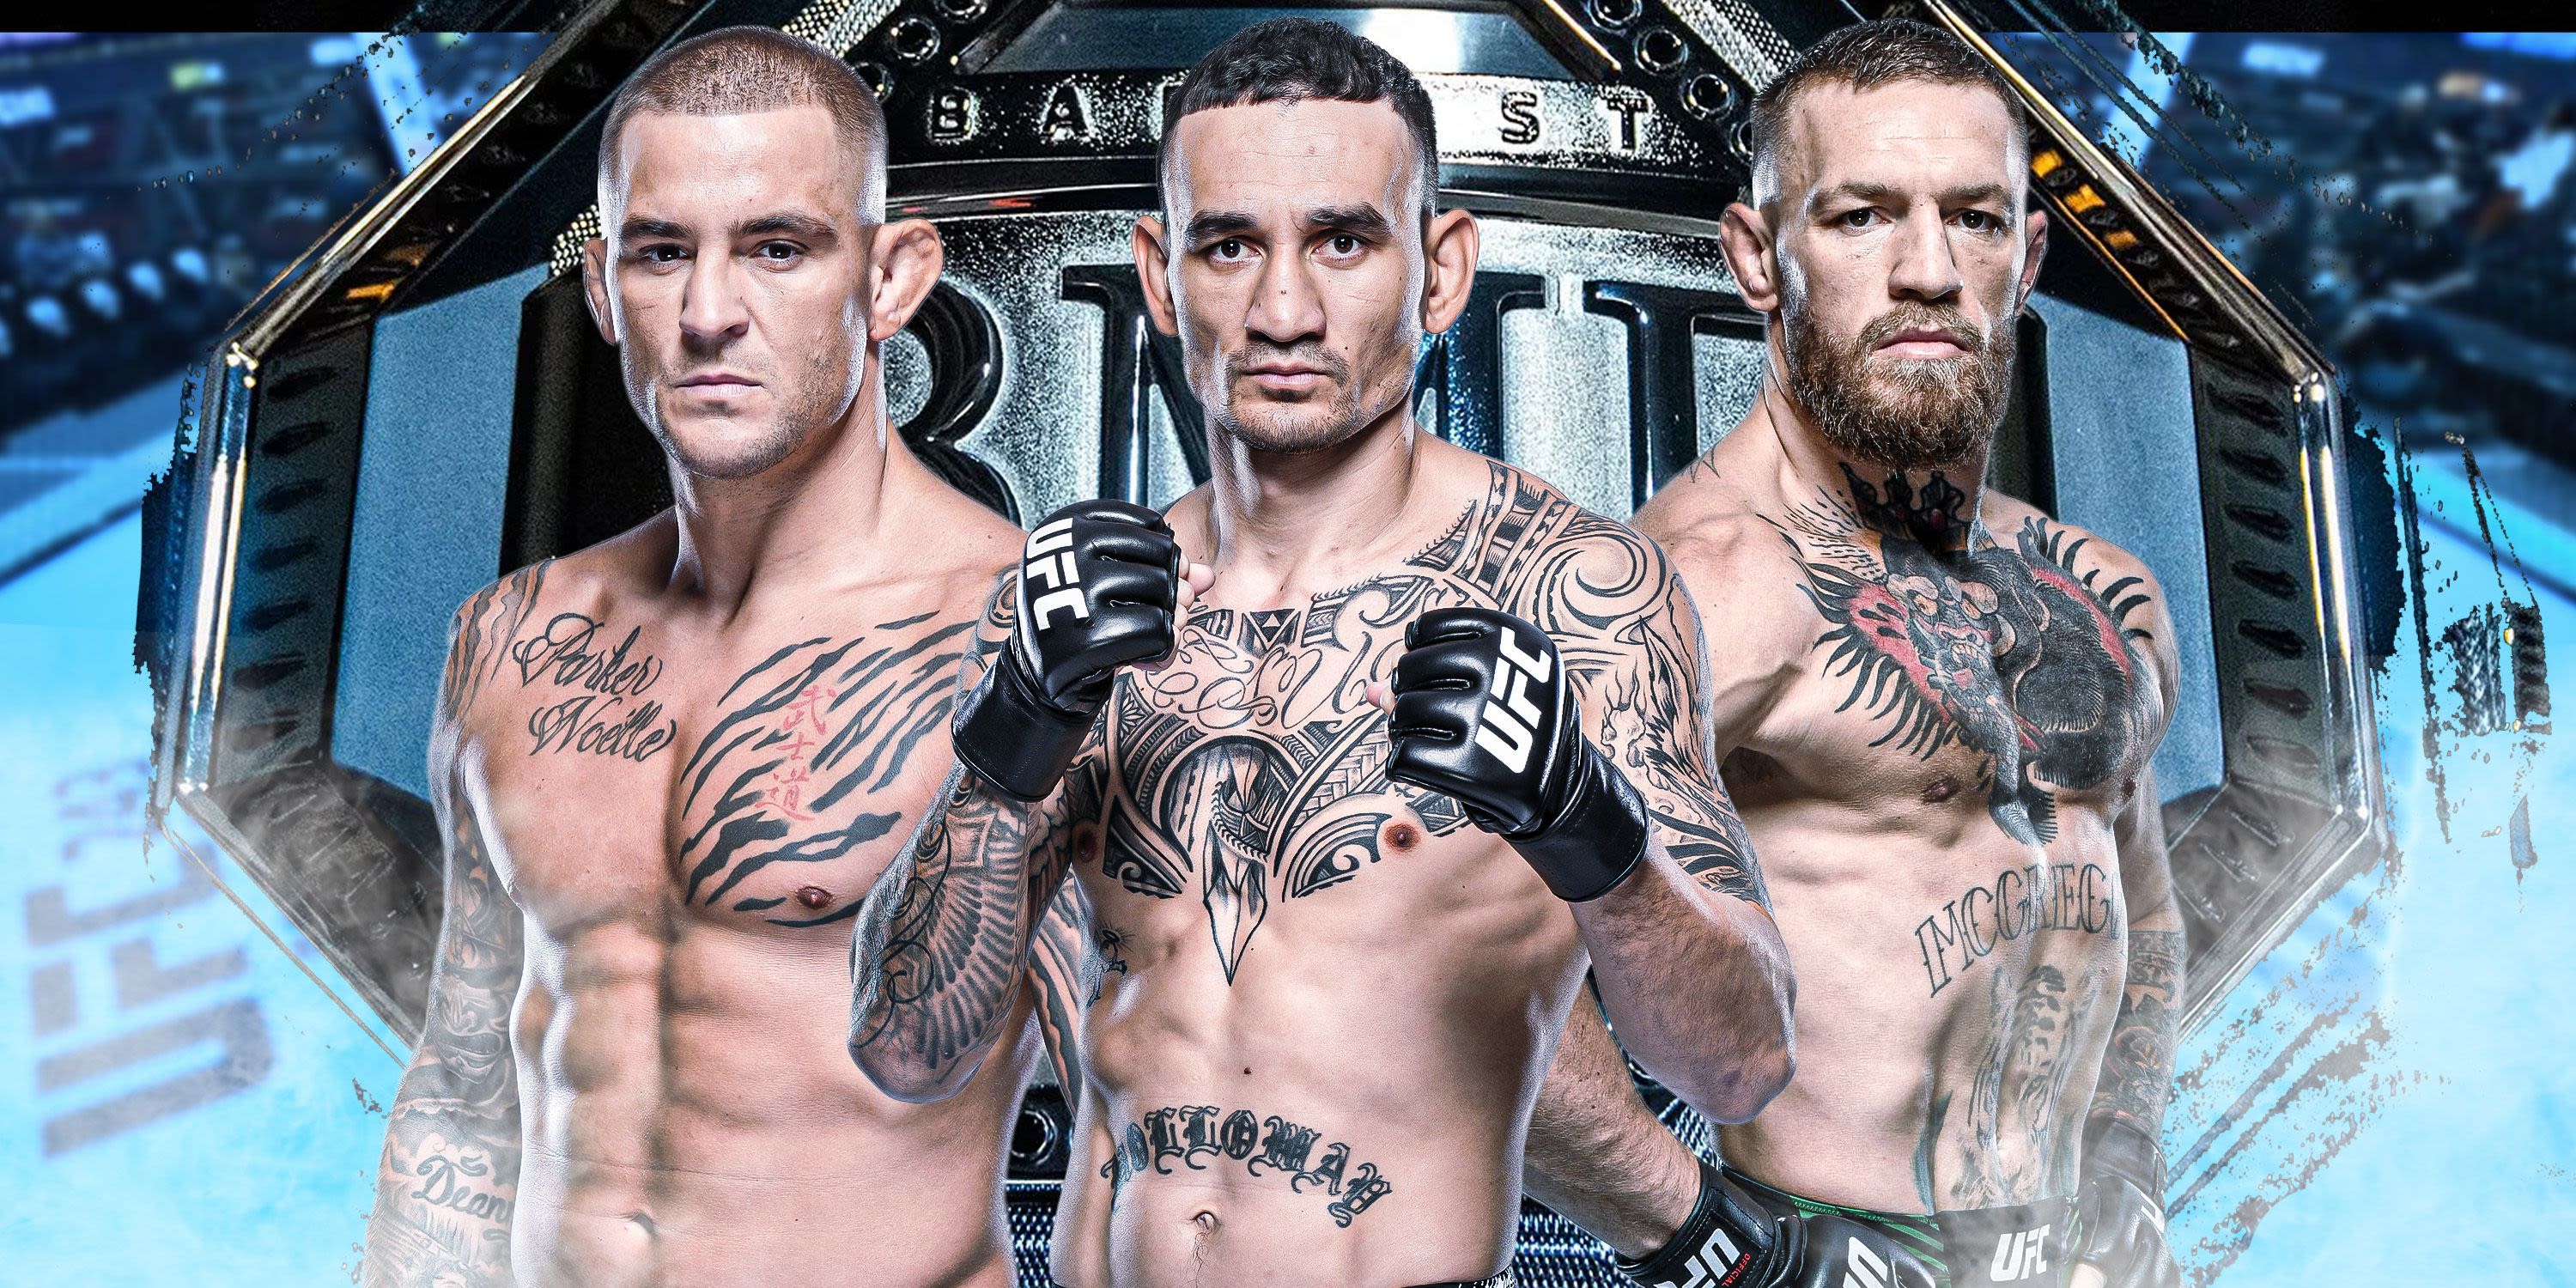 UFC star Max Holloway has five possible opponents he could defend his BMF title against